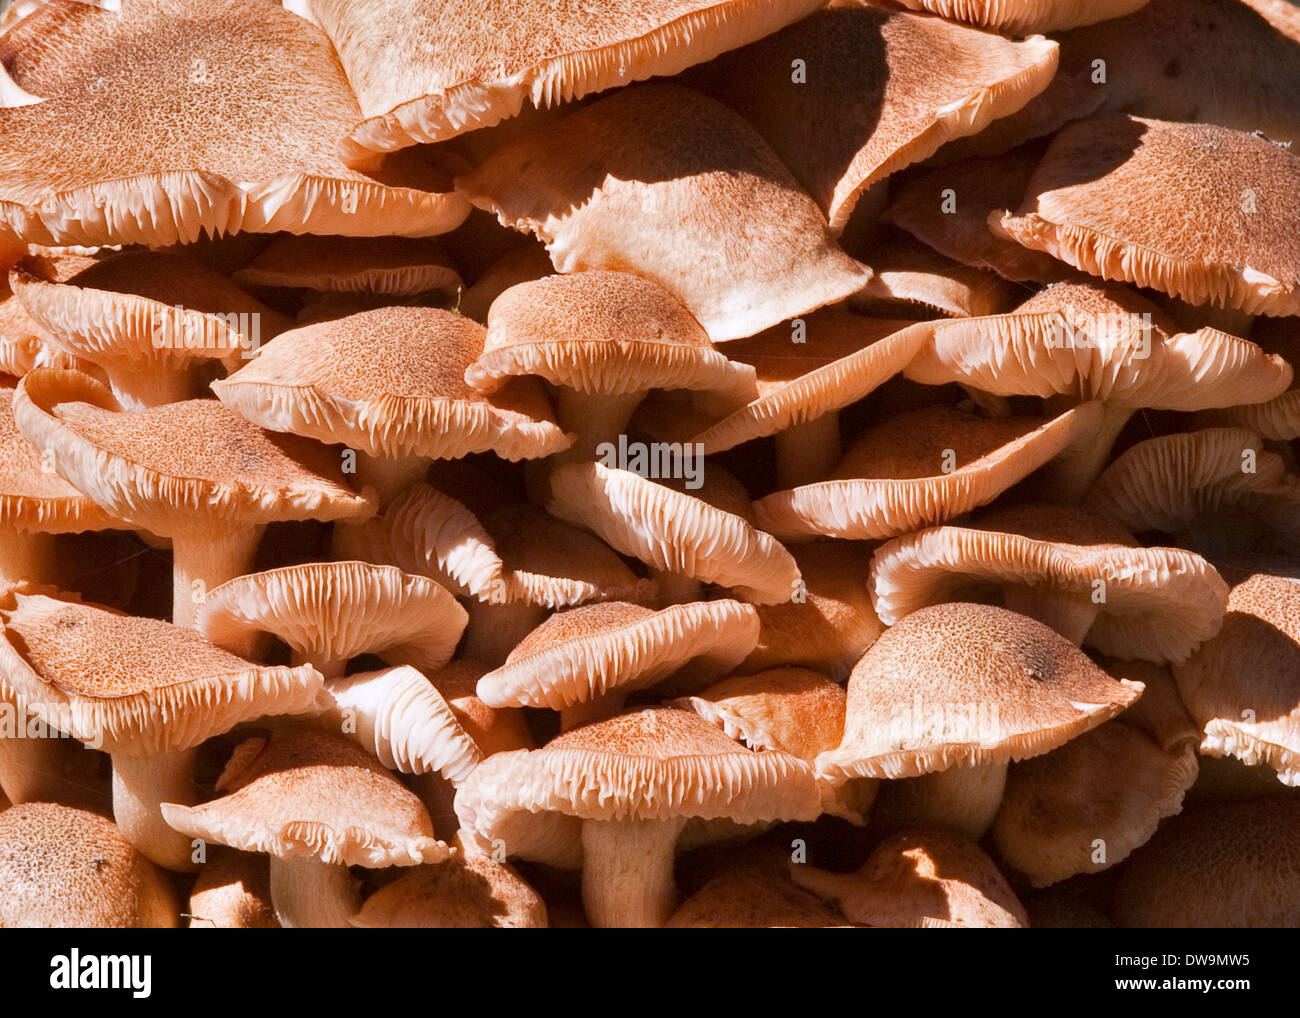 Clump of Toadstools Stock Photo